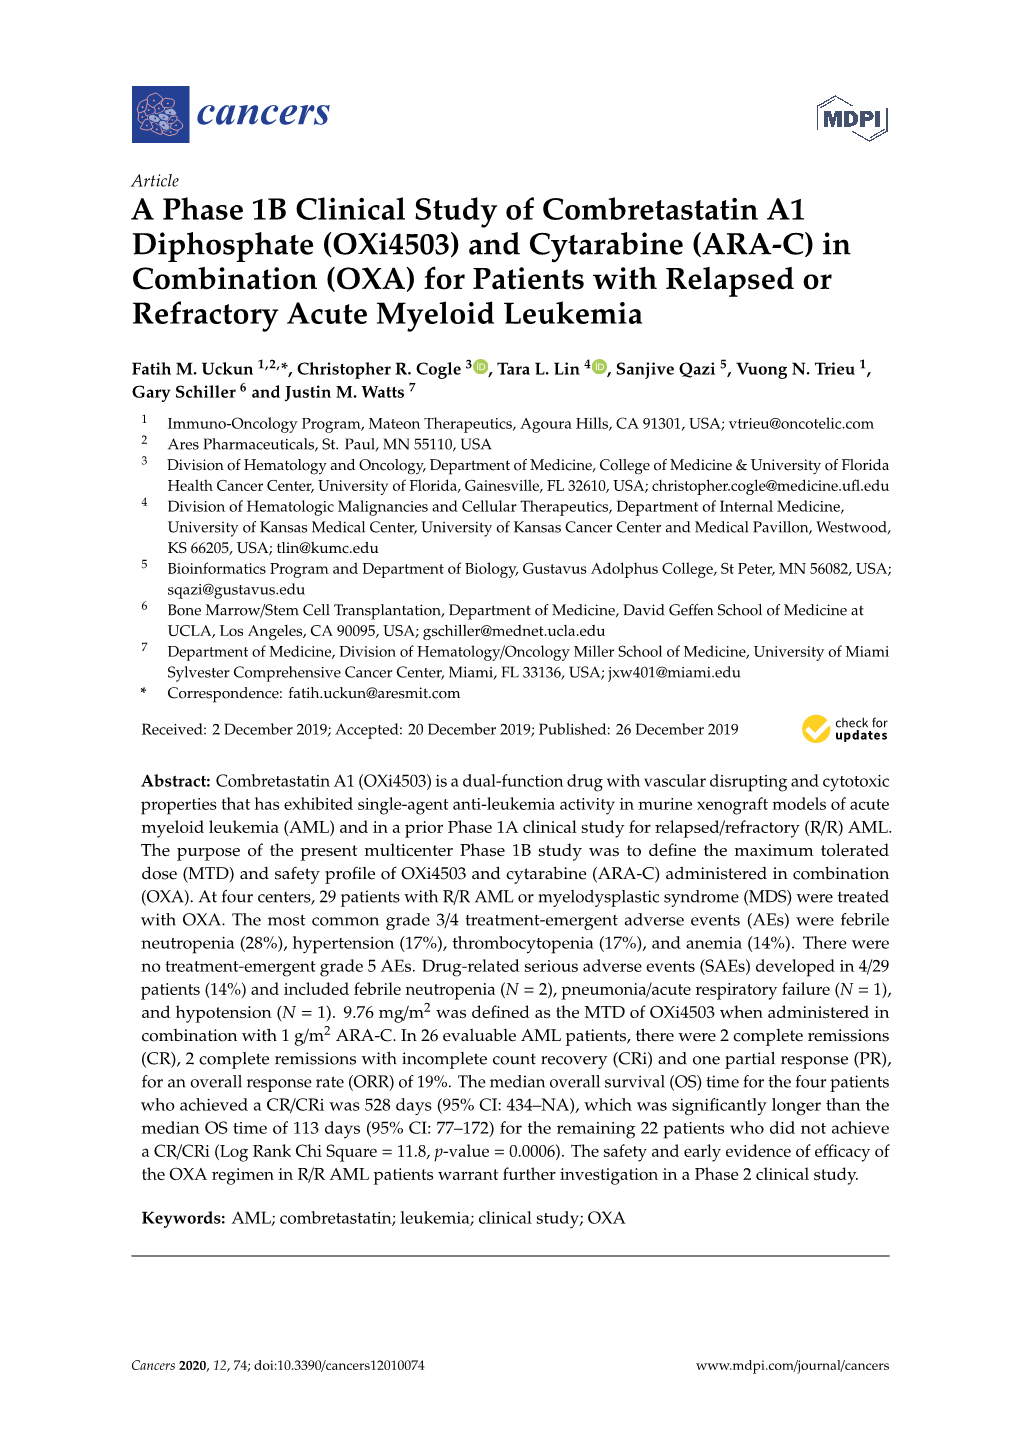 A Phase 1B Clinical Study of Combretastatin A1 Diphosphate